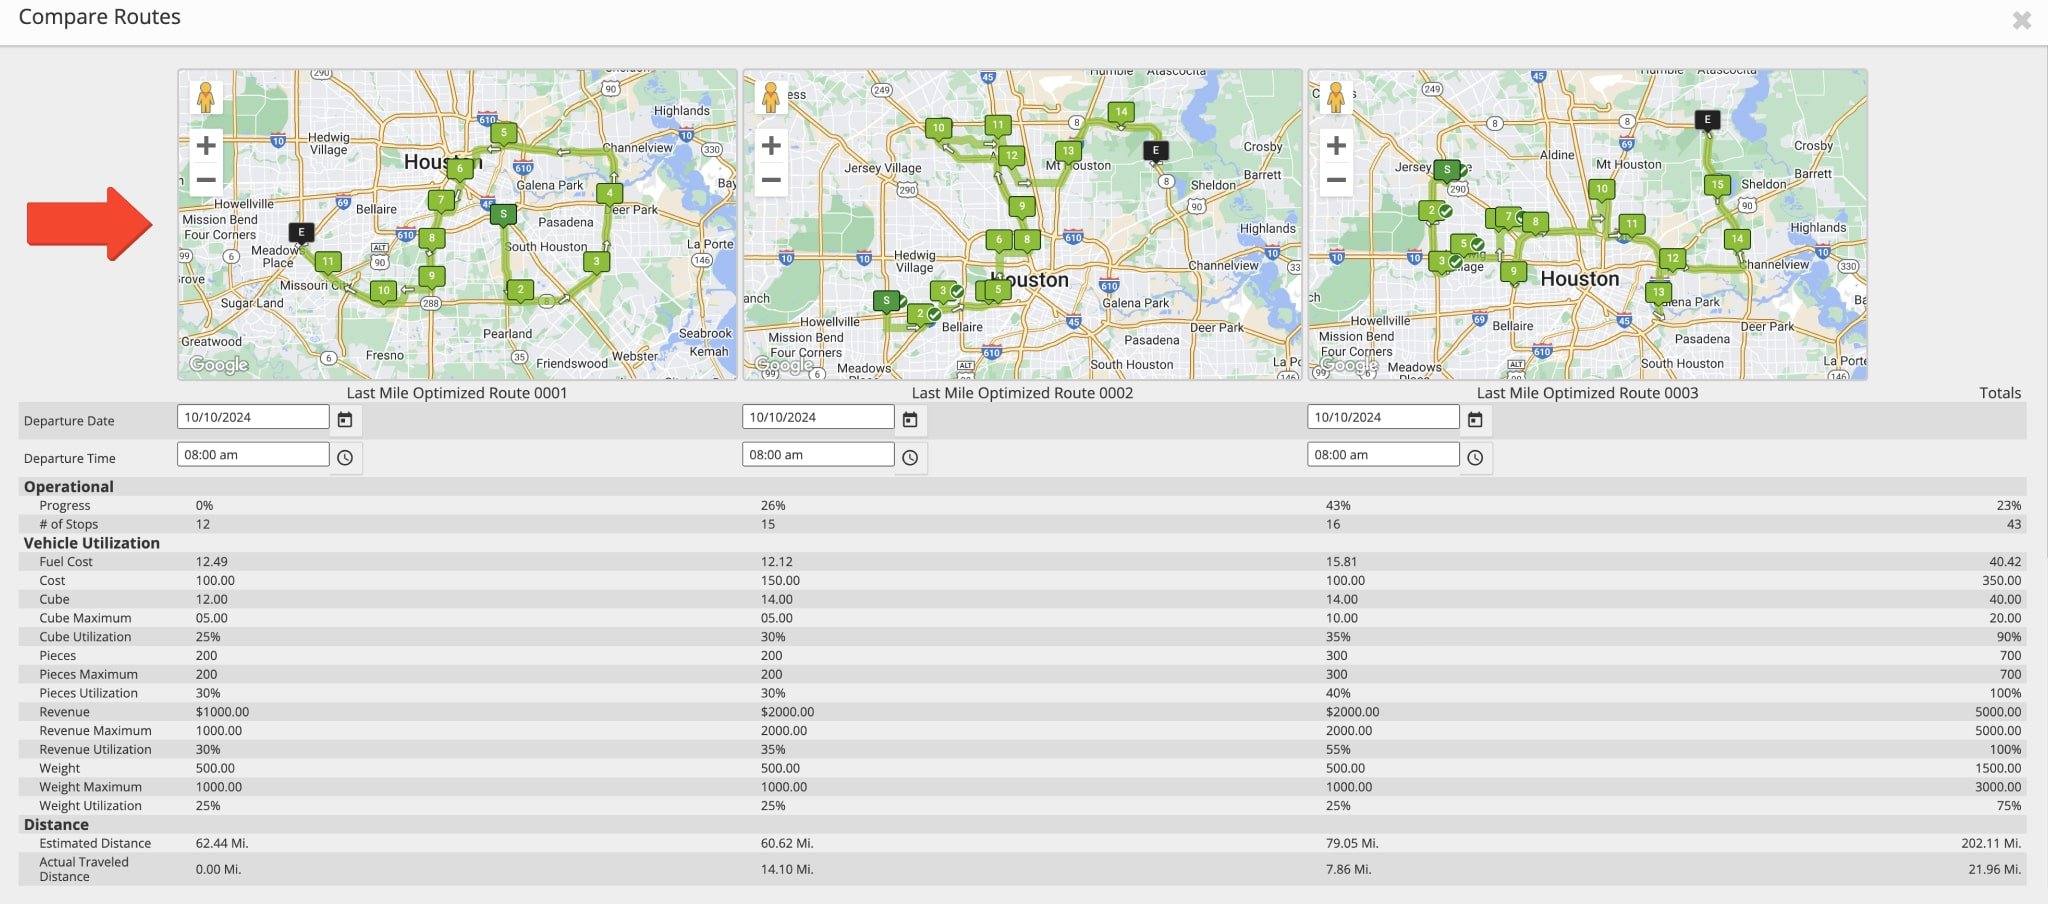 Compare multiple route maps side by side with route directions and zoom on the map to view route details.